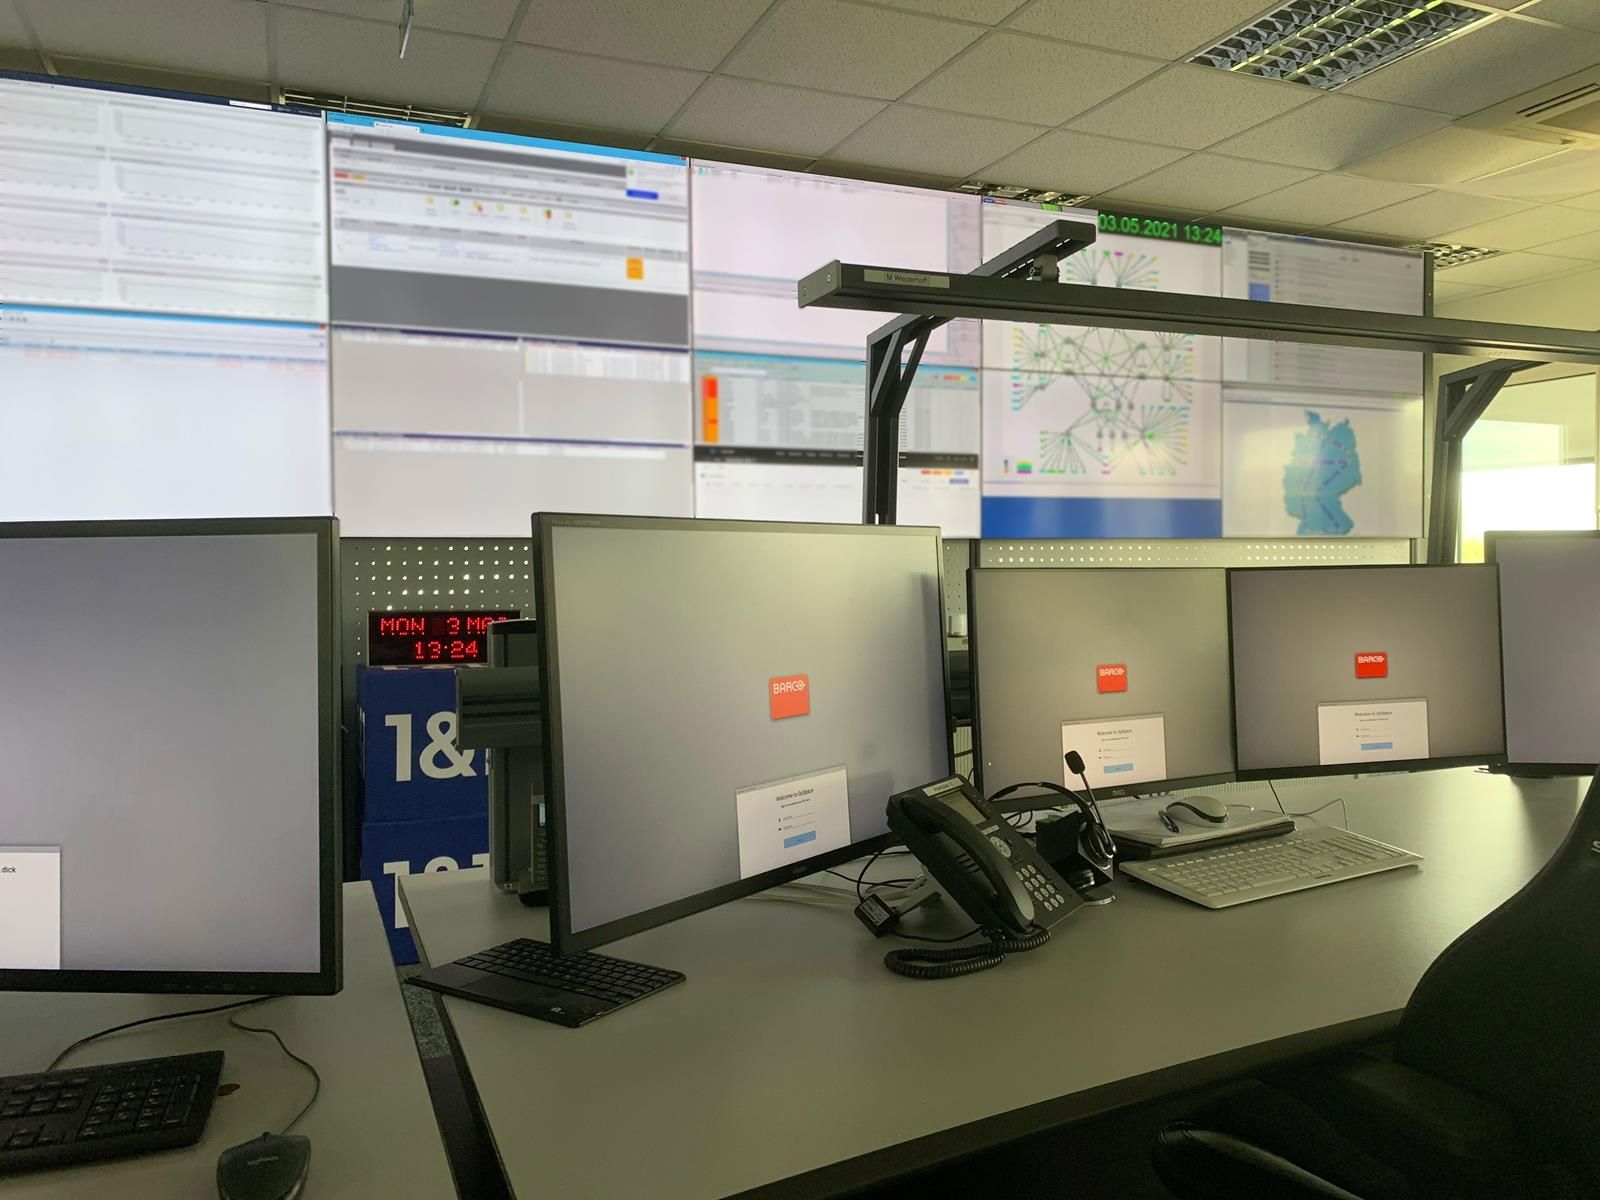 1&1 Versatel chooses OpSpace to streamline network incident management